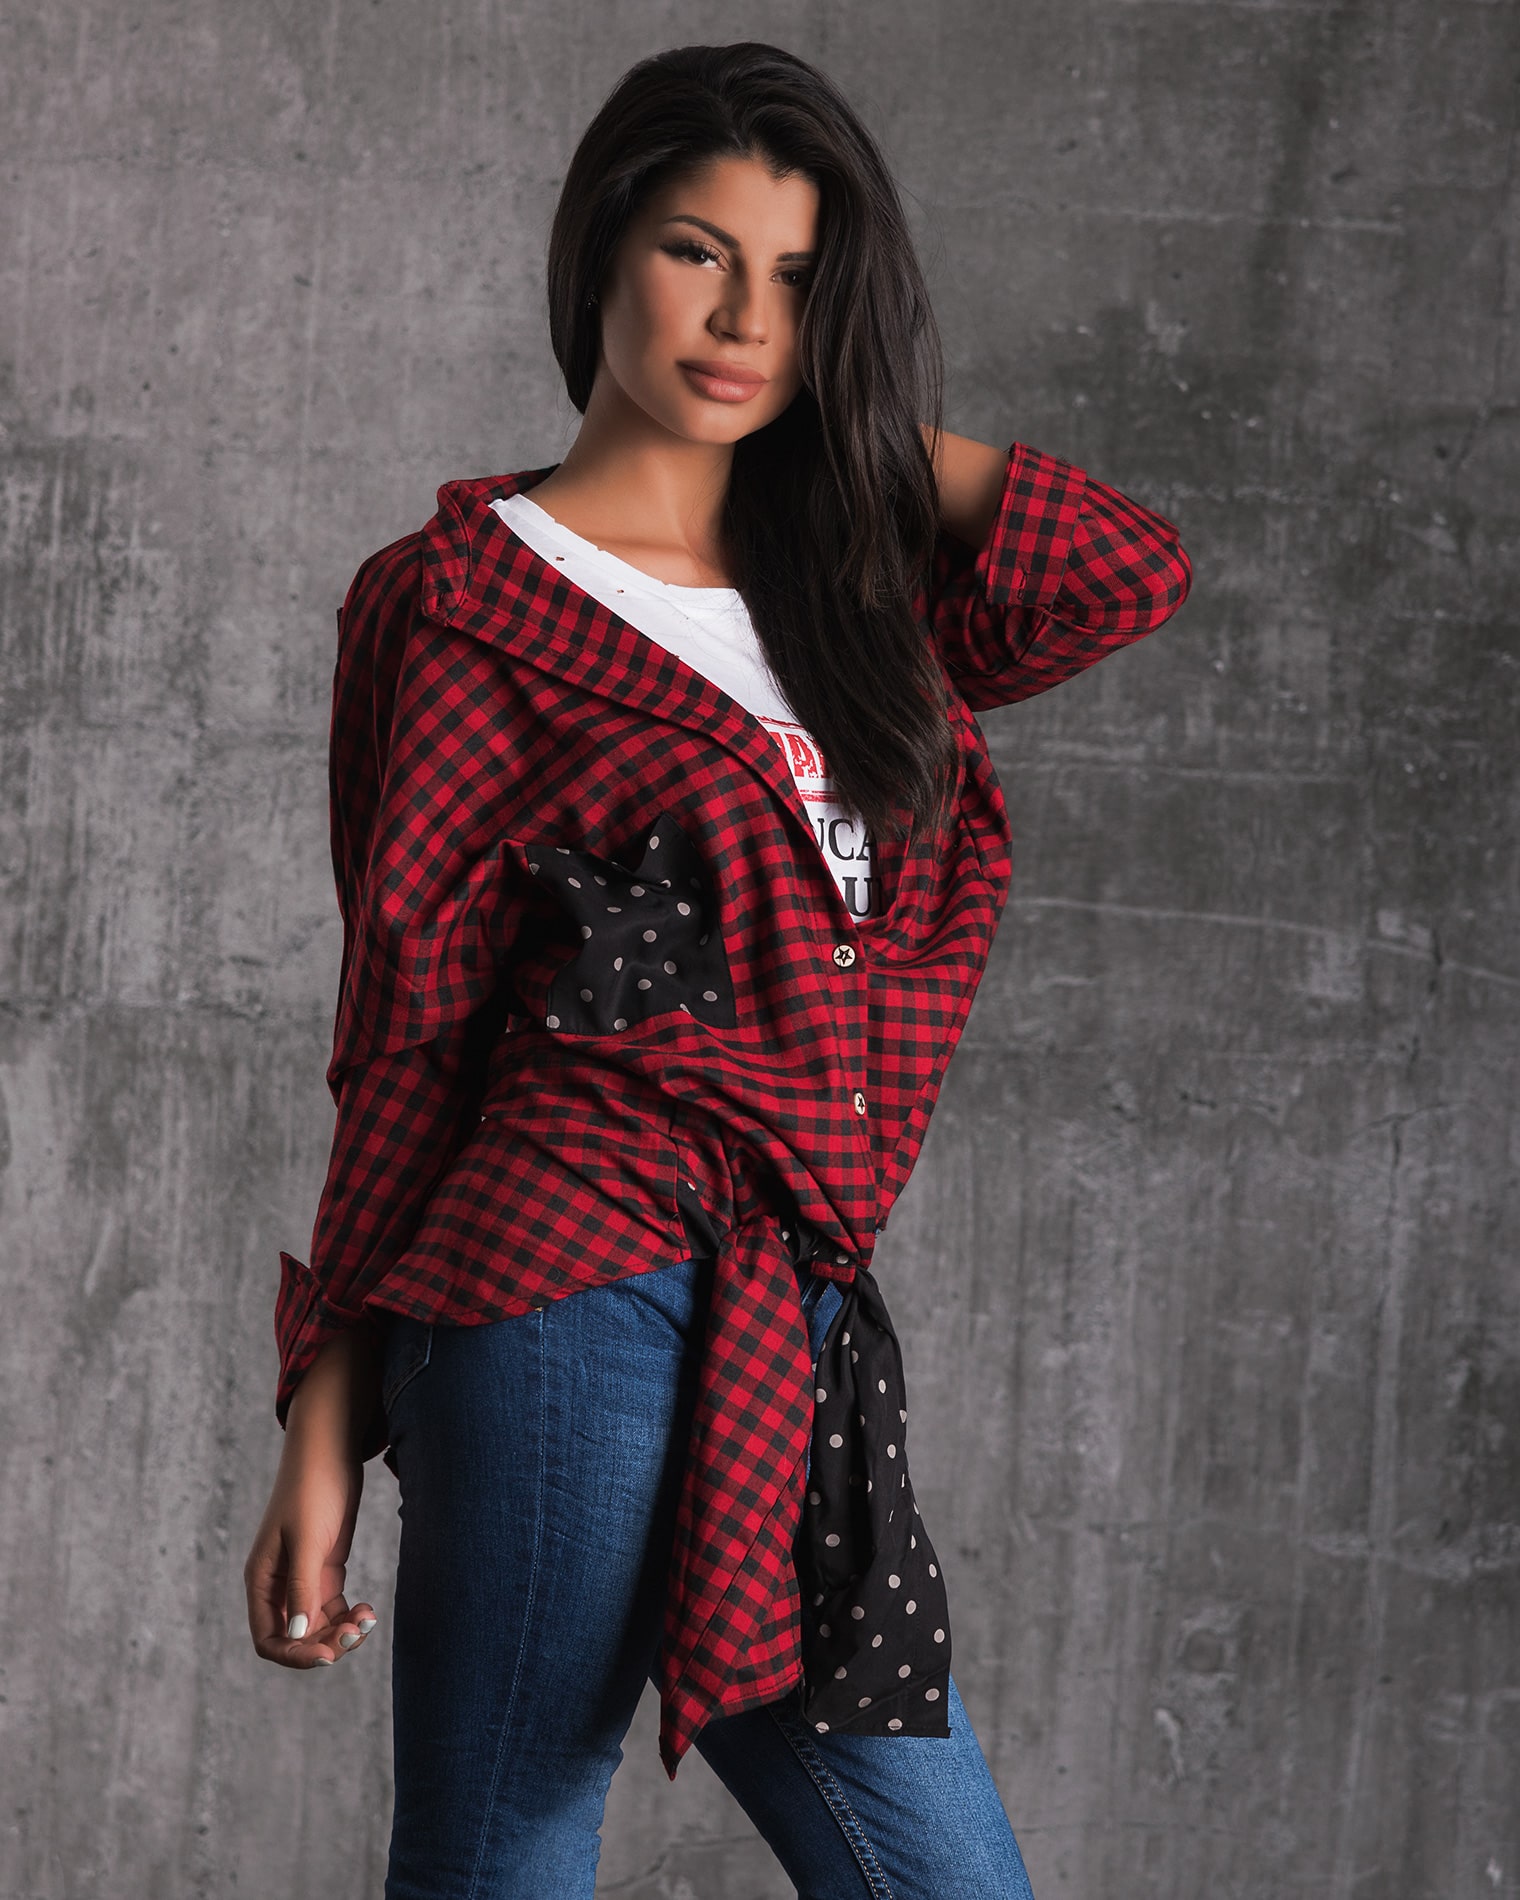 Super Plaid Shirt With Sequins, Red Color